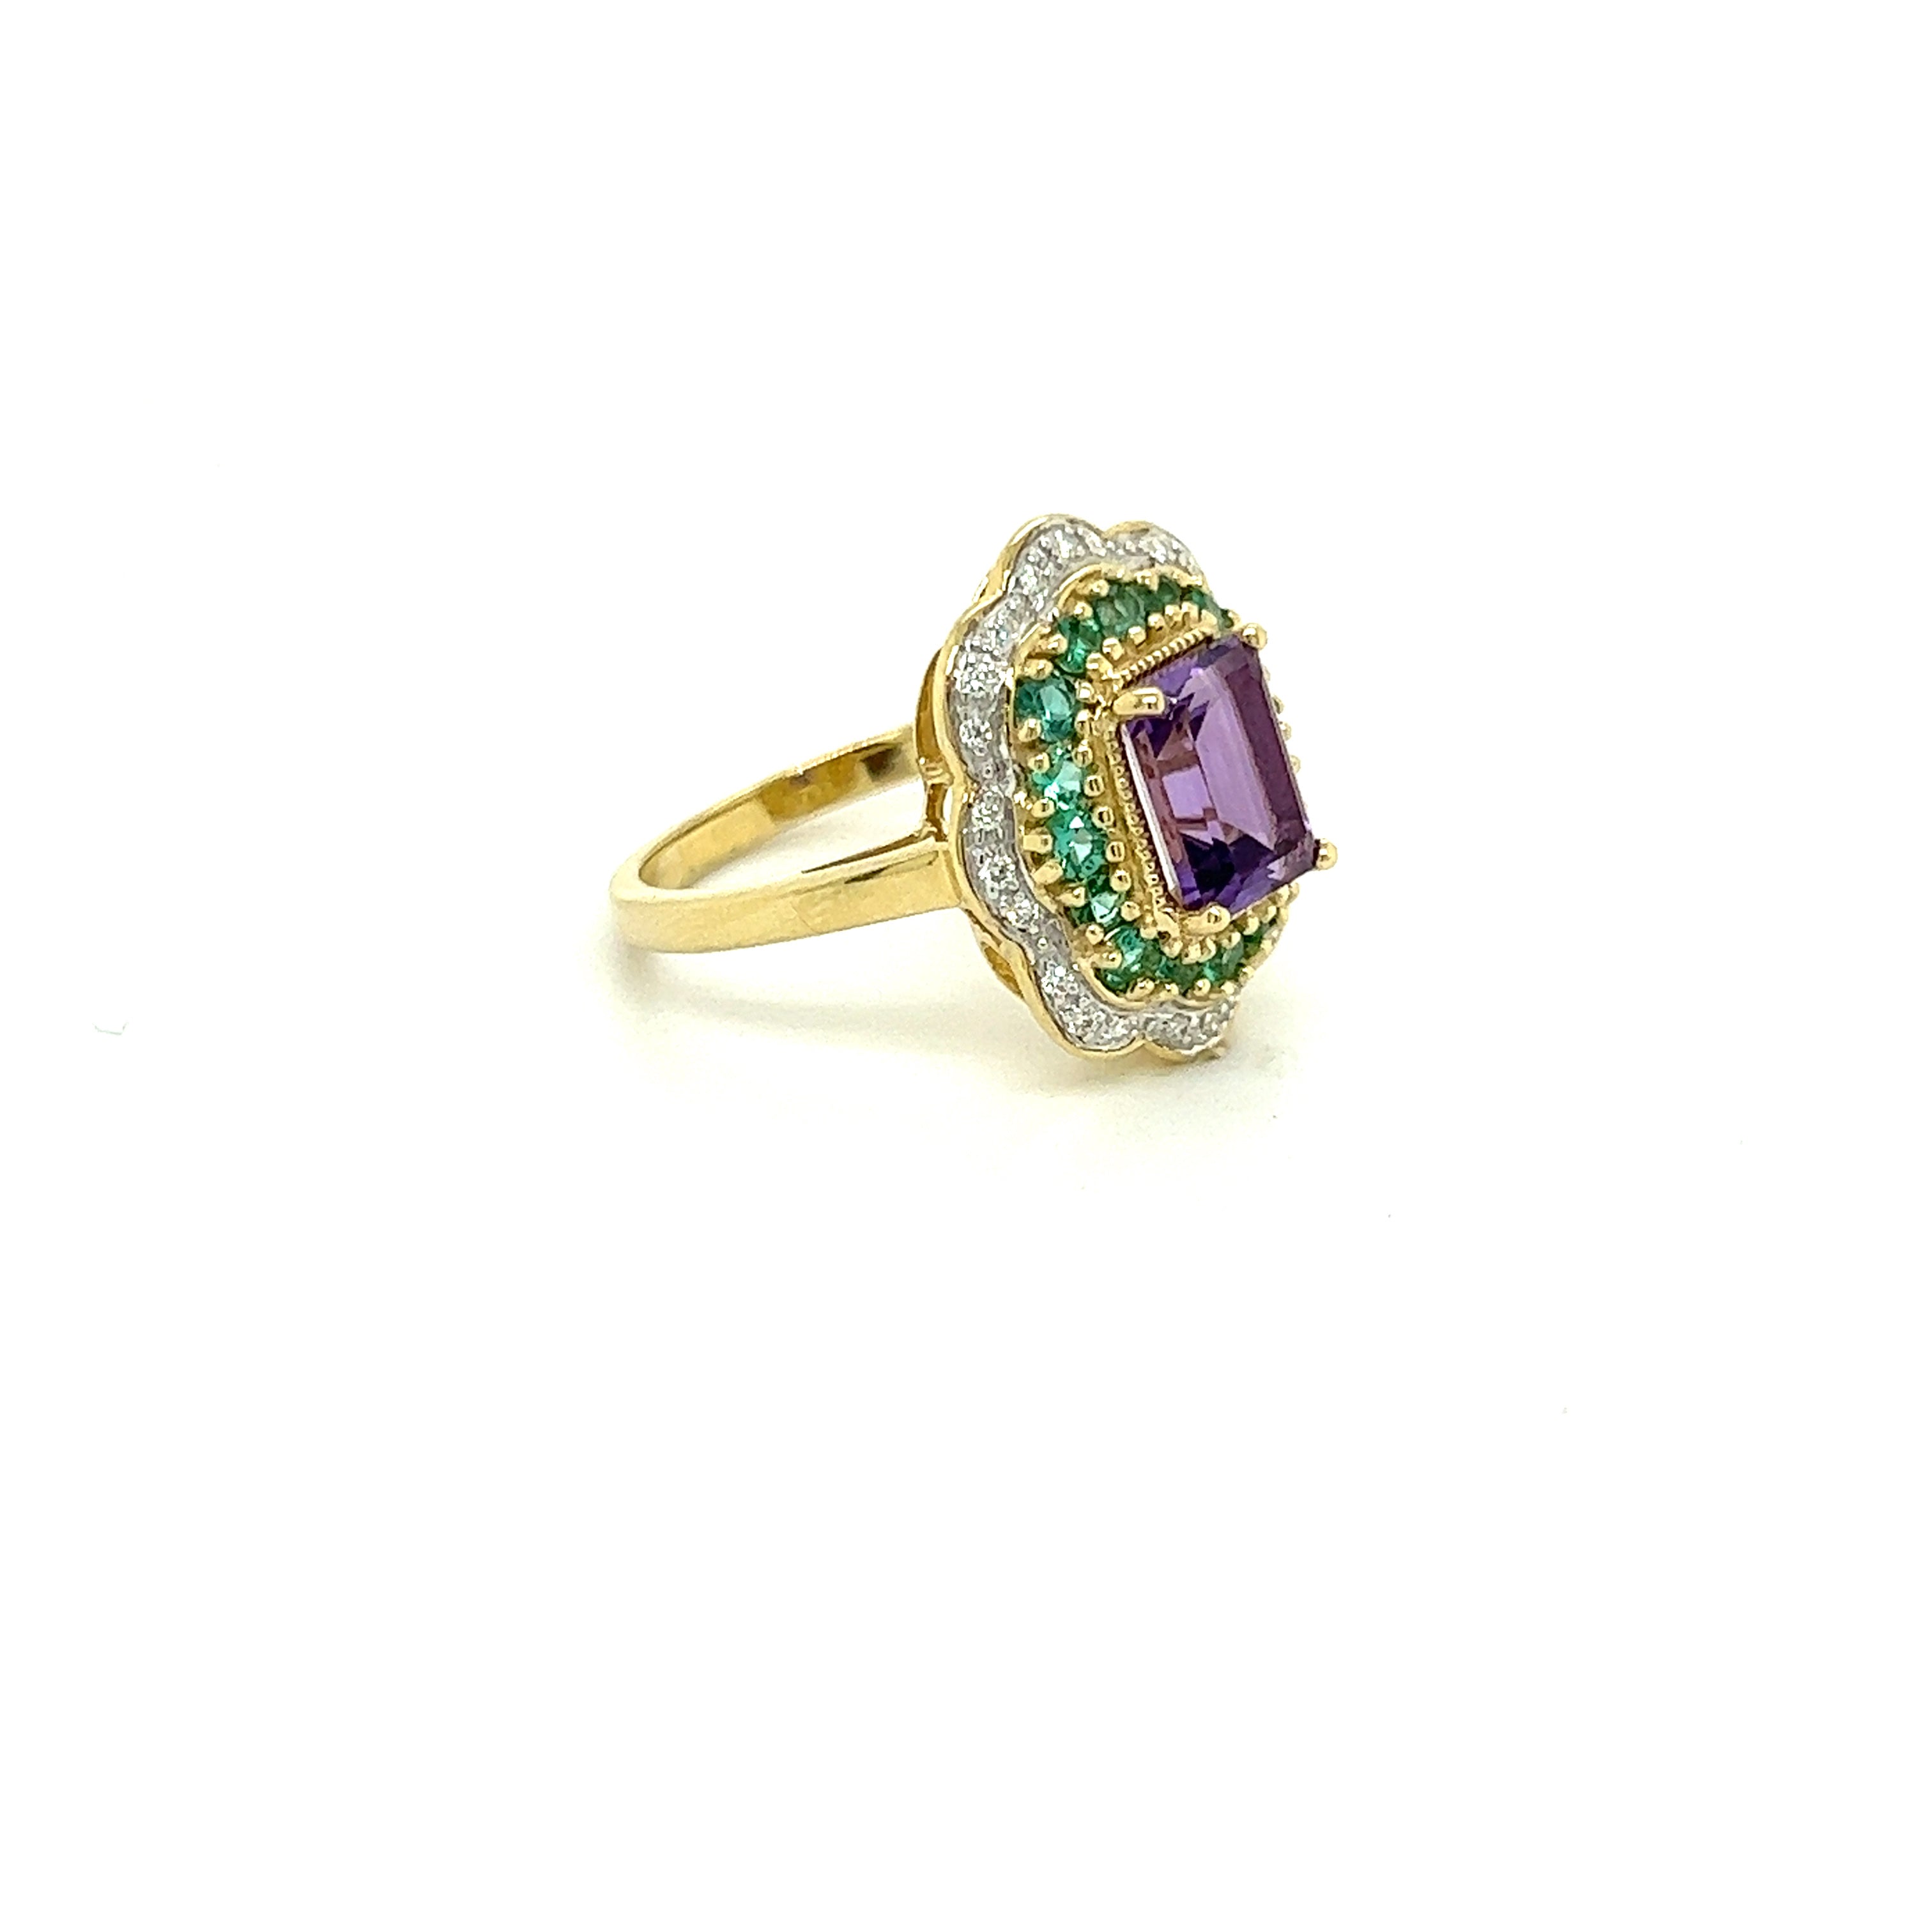 9ct yellow gold amethyst, emerald and diamond ring.